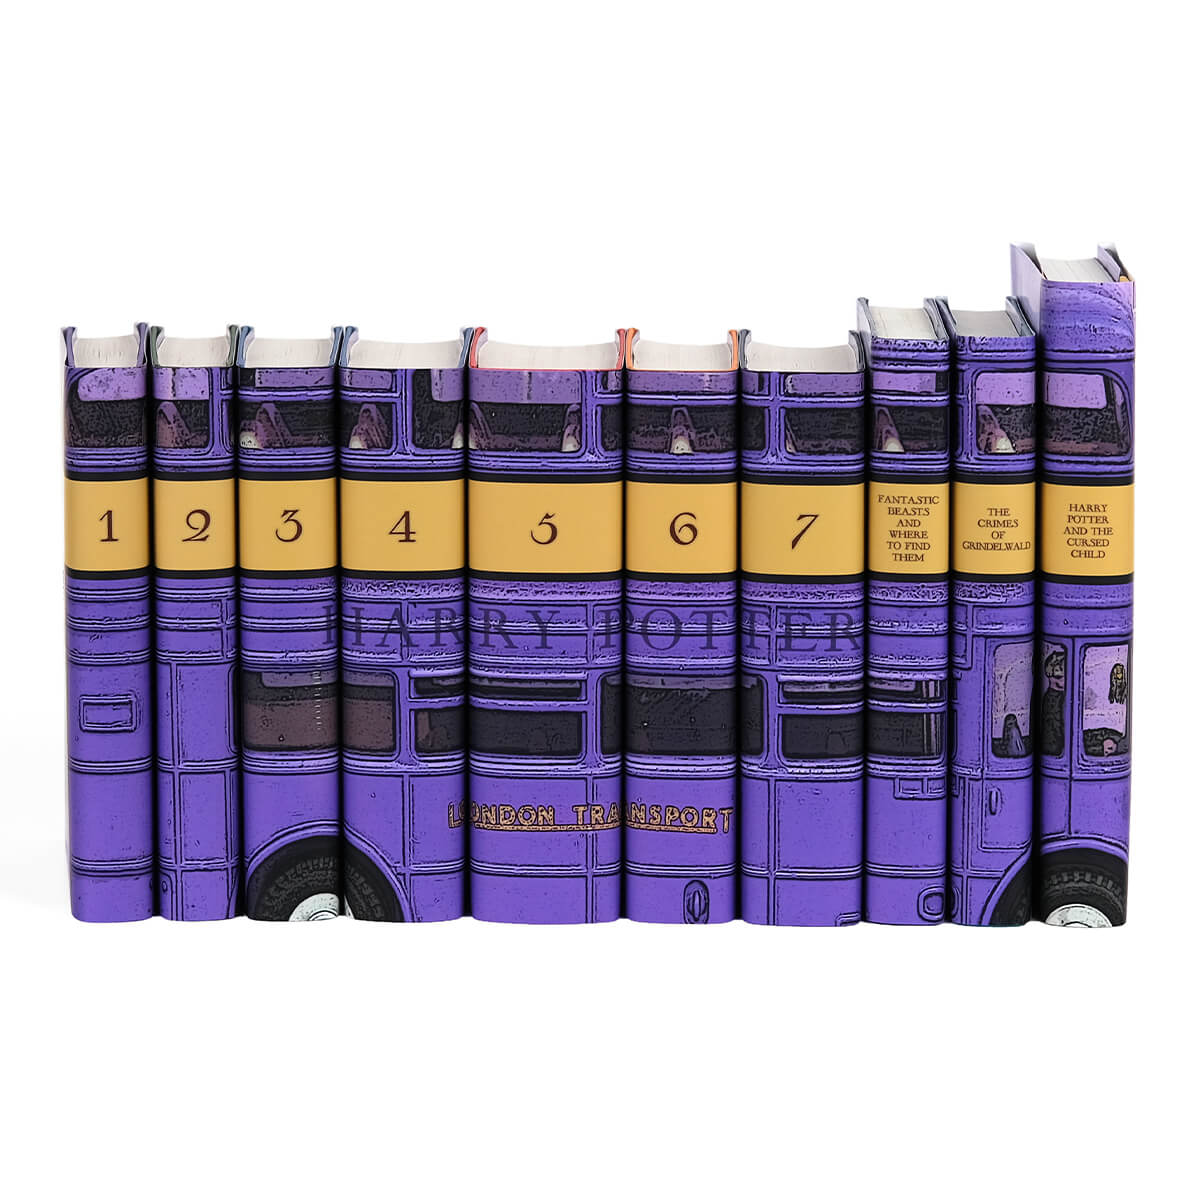 Harry Potter Bus, Jackets Only set from JuniperCustom. Purple London bus stretches across book spines. Book number and titles centered on spines.